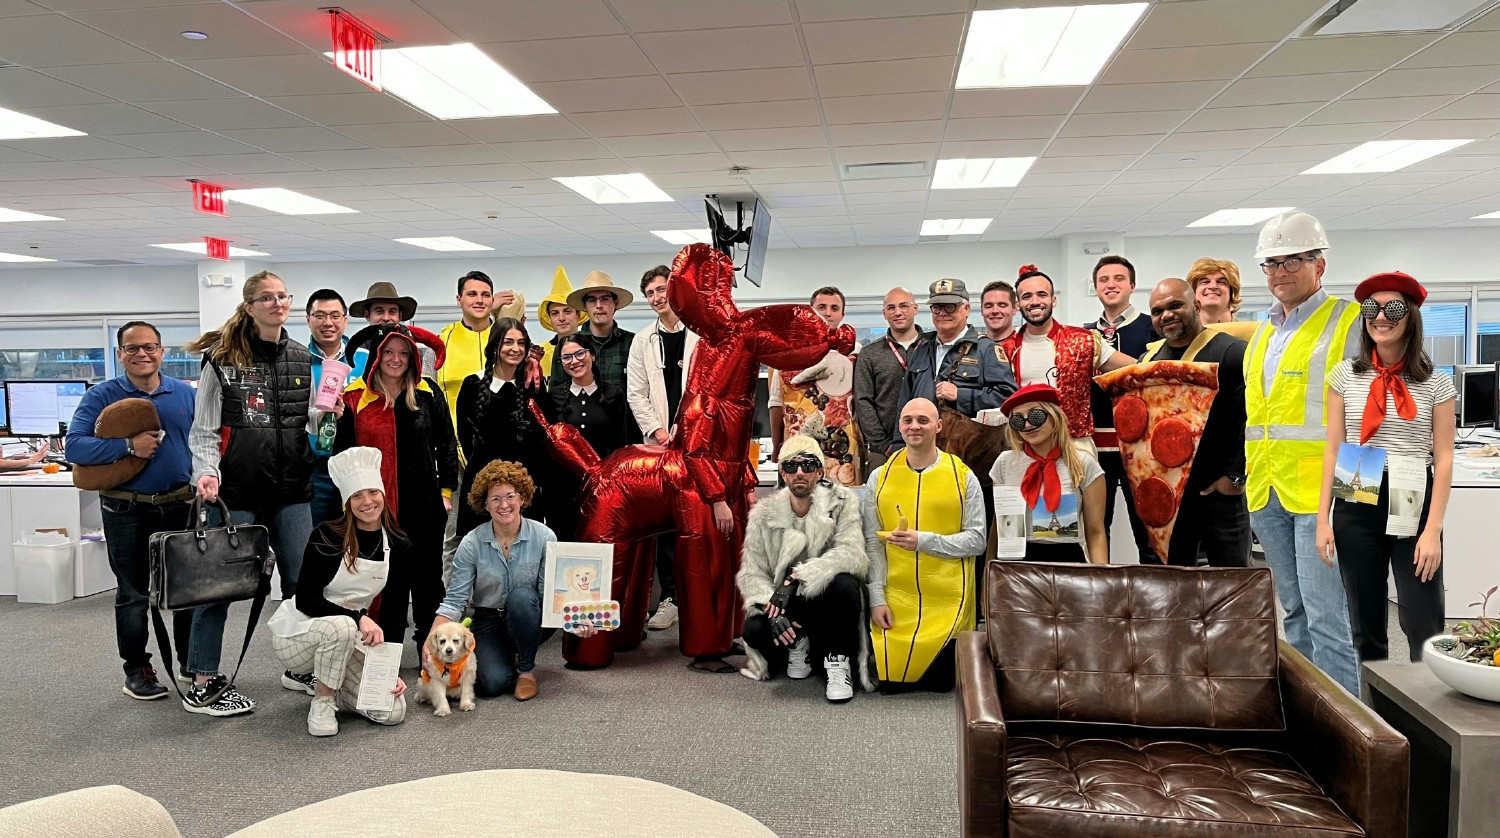 2023 Halloween costume contest at the office